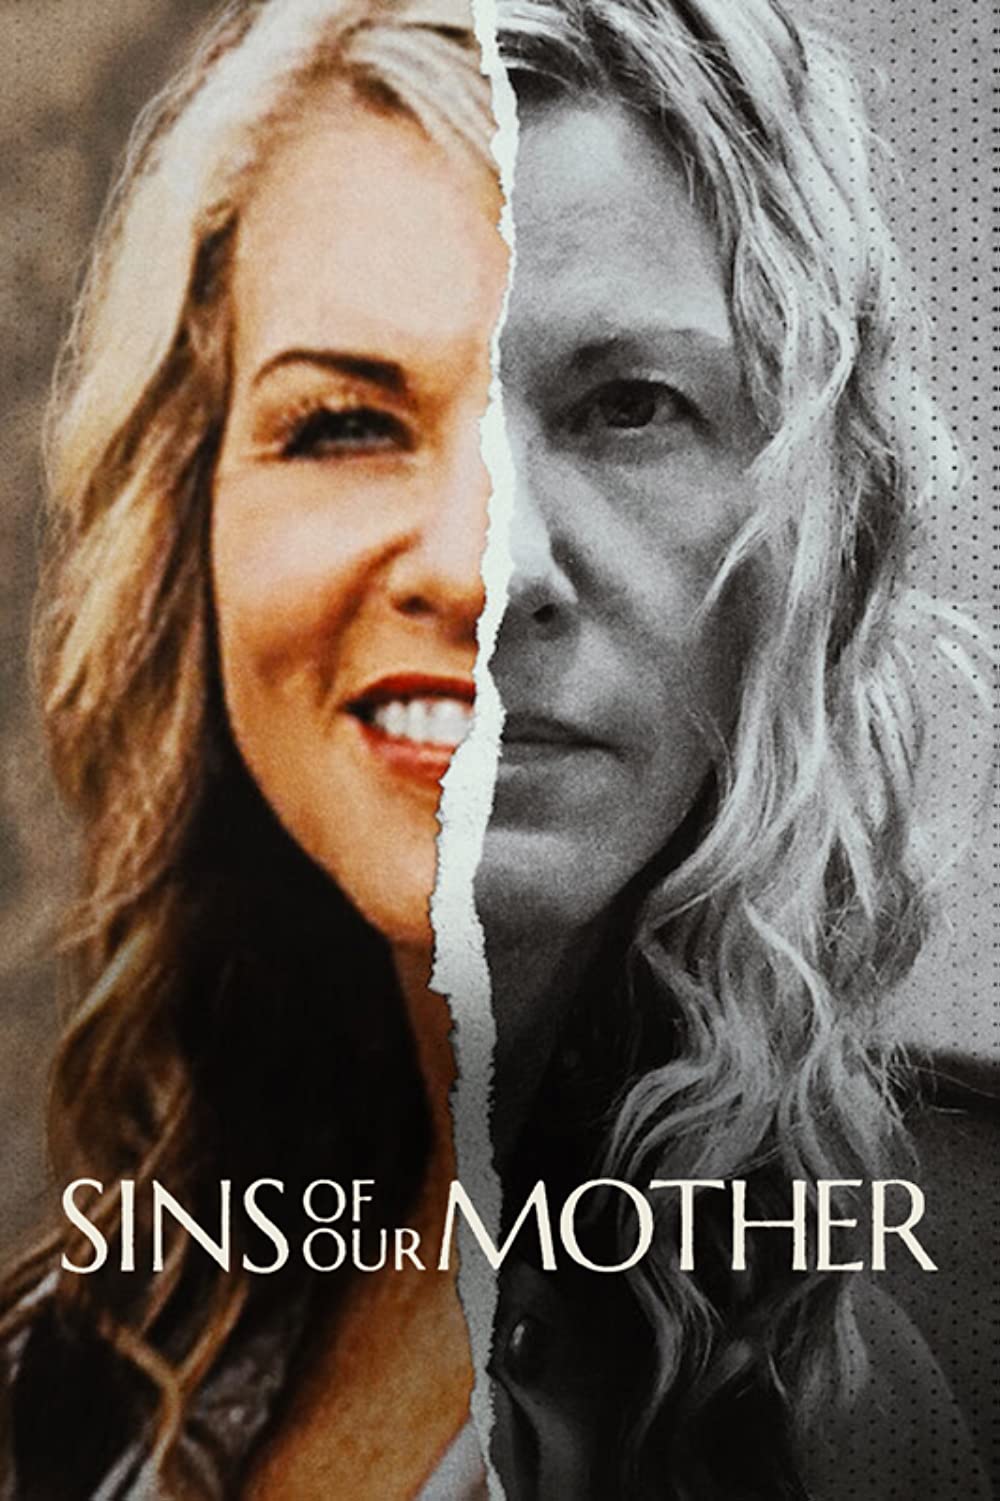 sins of our mother movie review